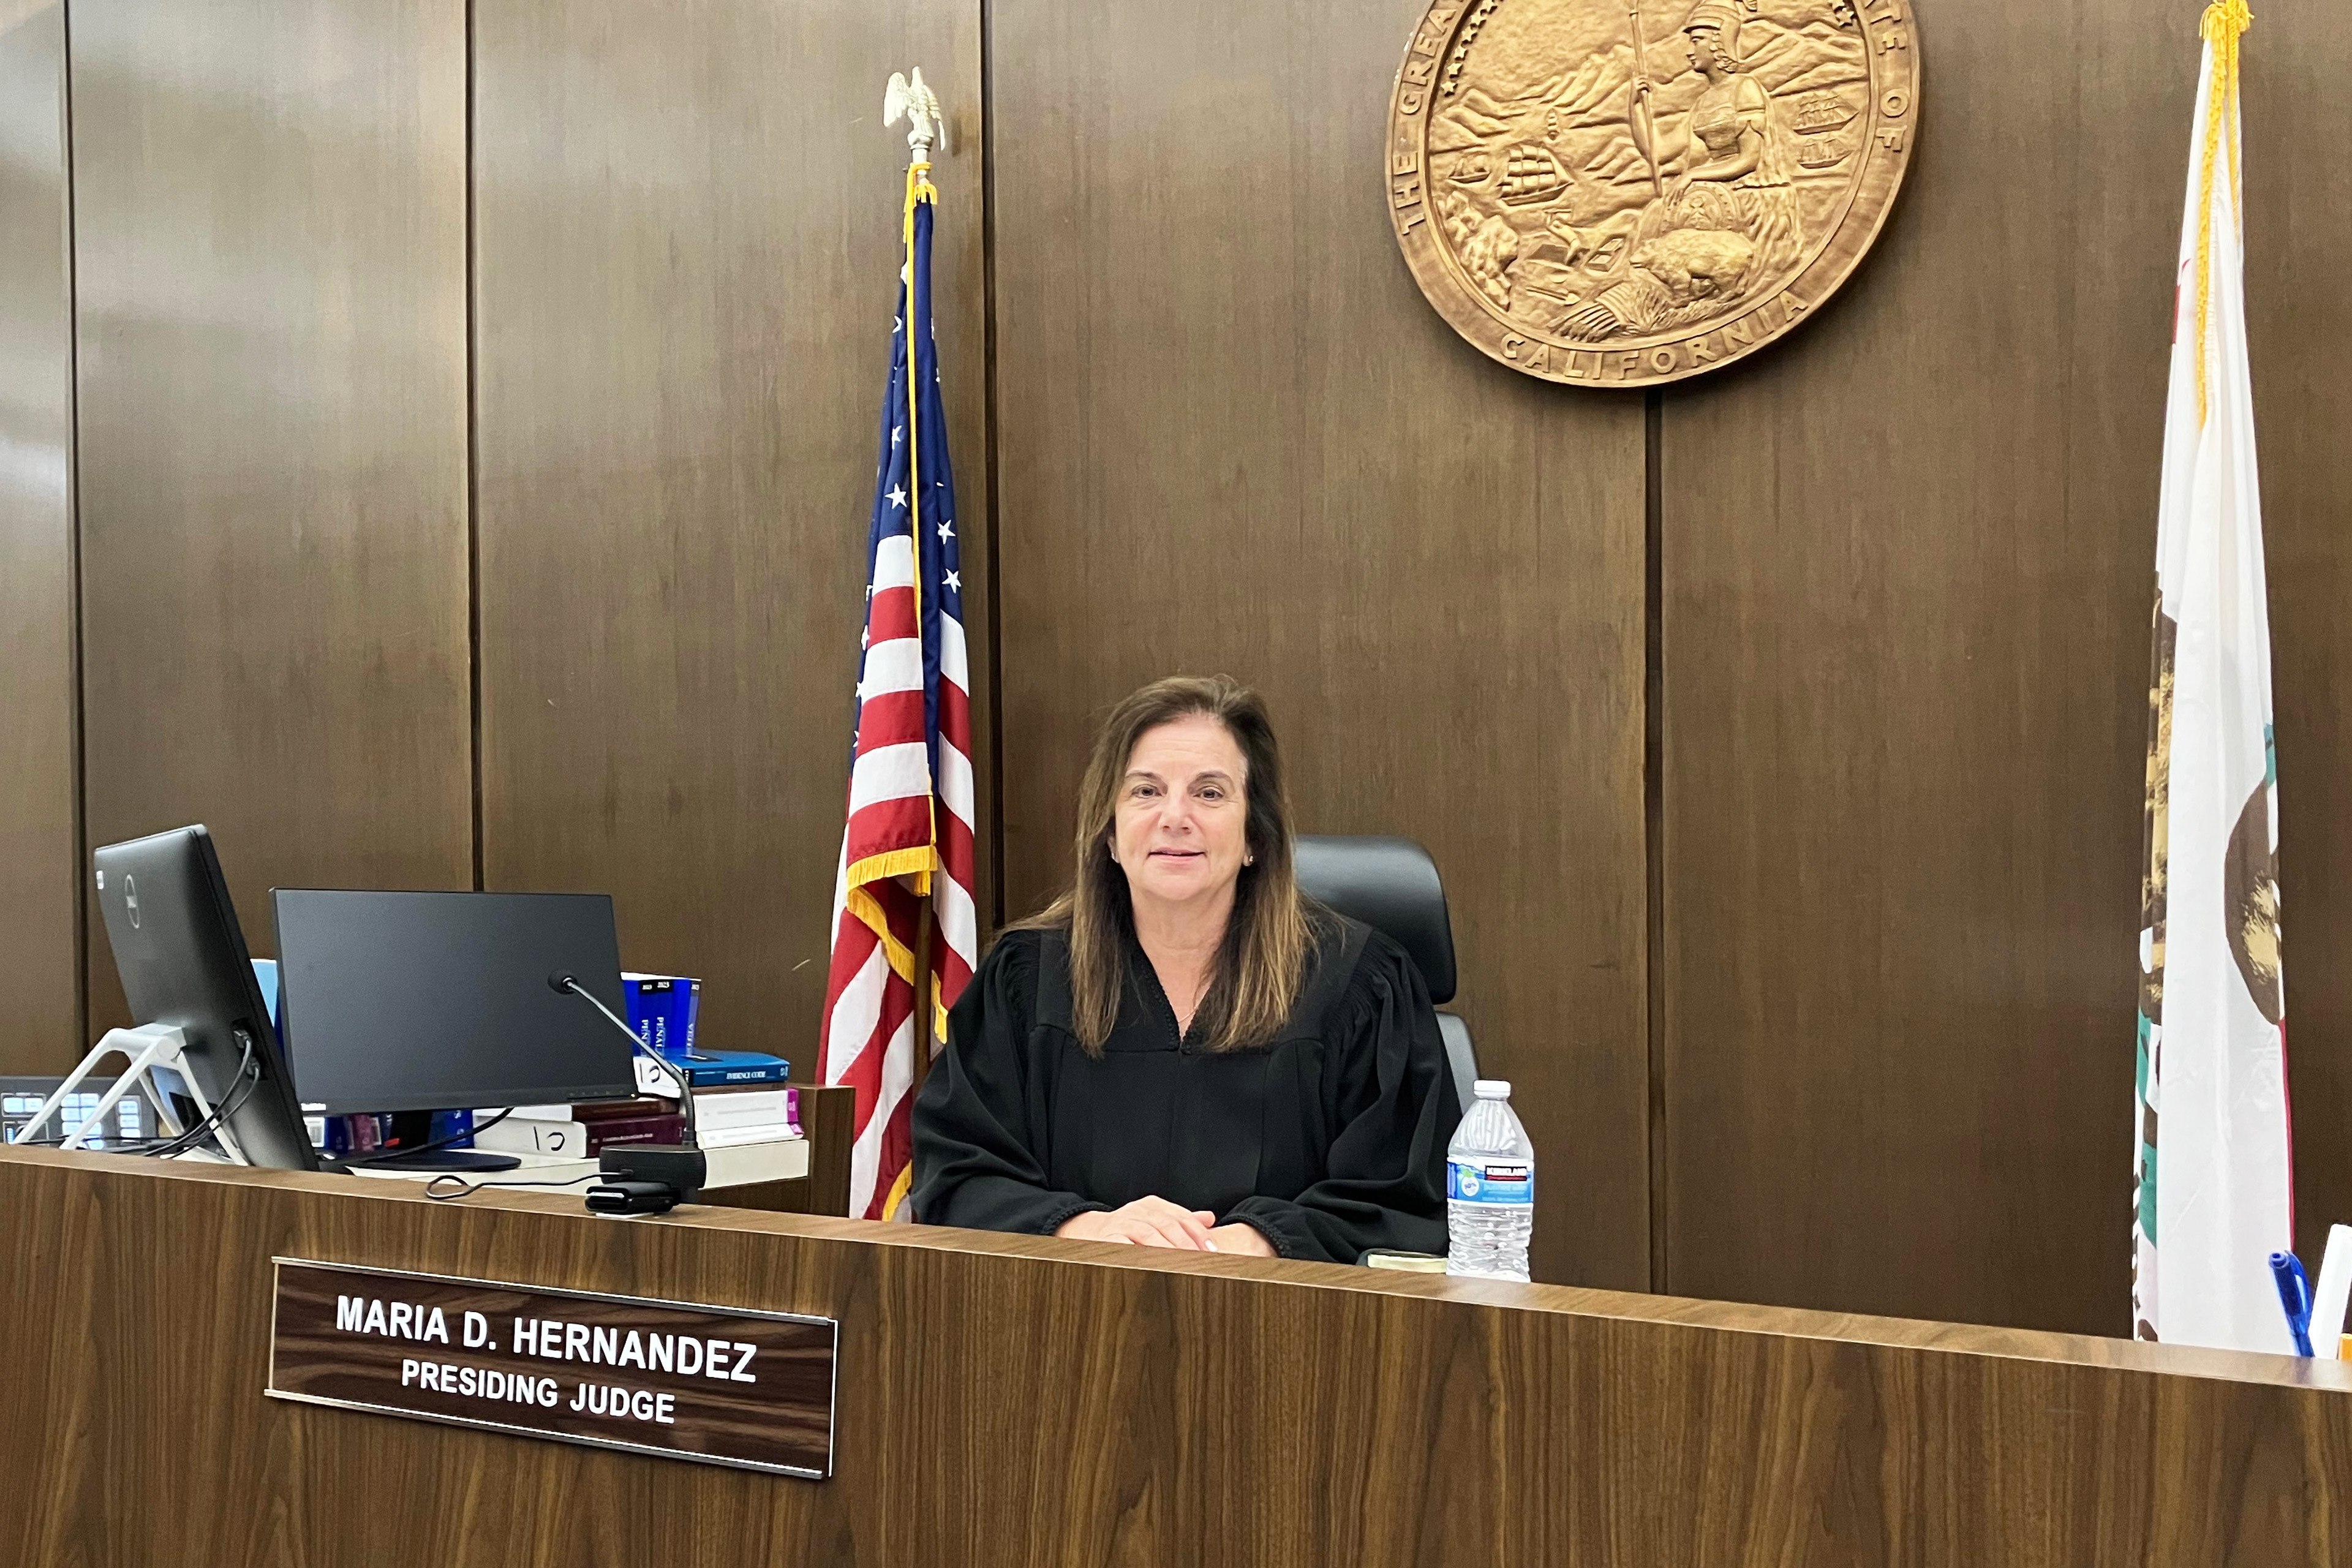 A photo of a judge sitting at their bench in a courtroom.